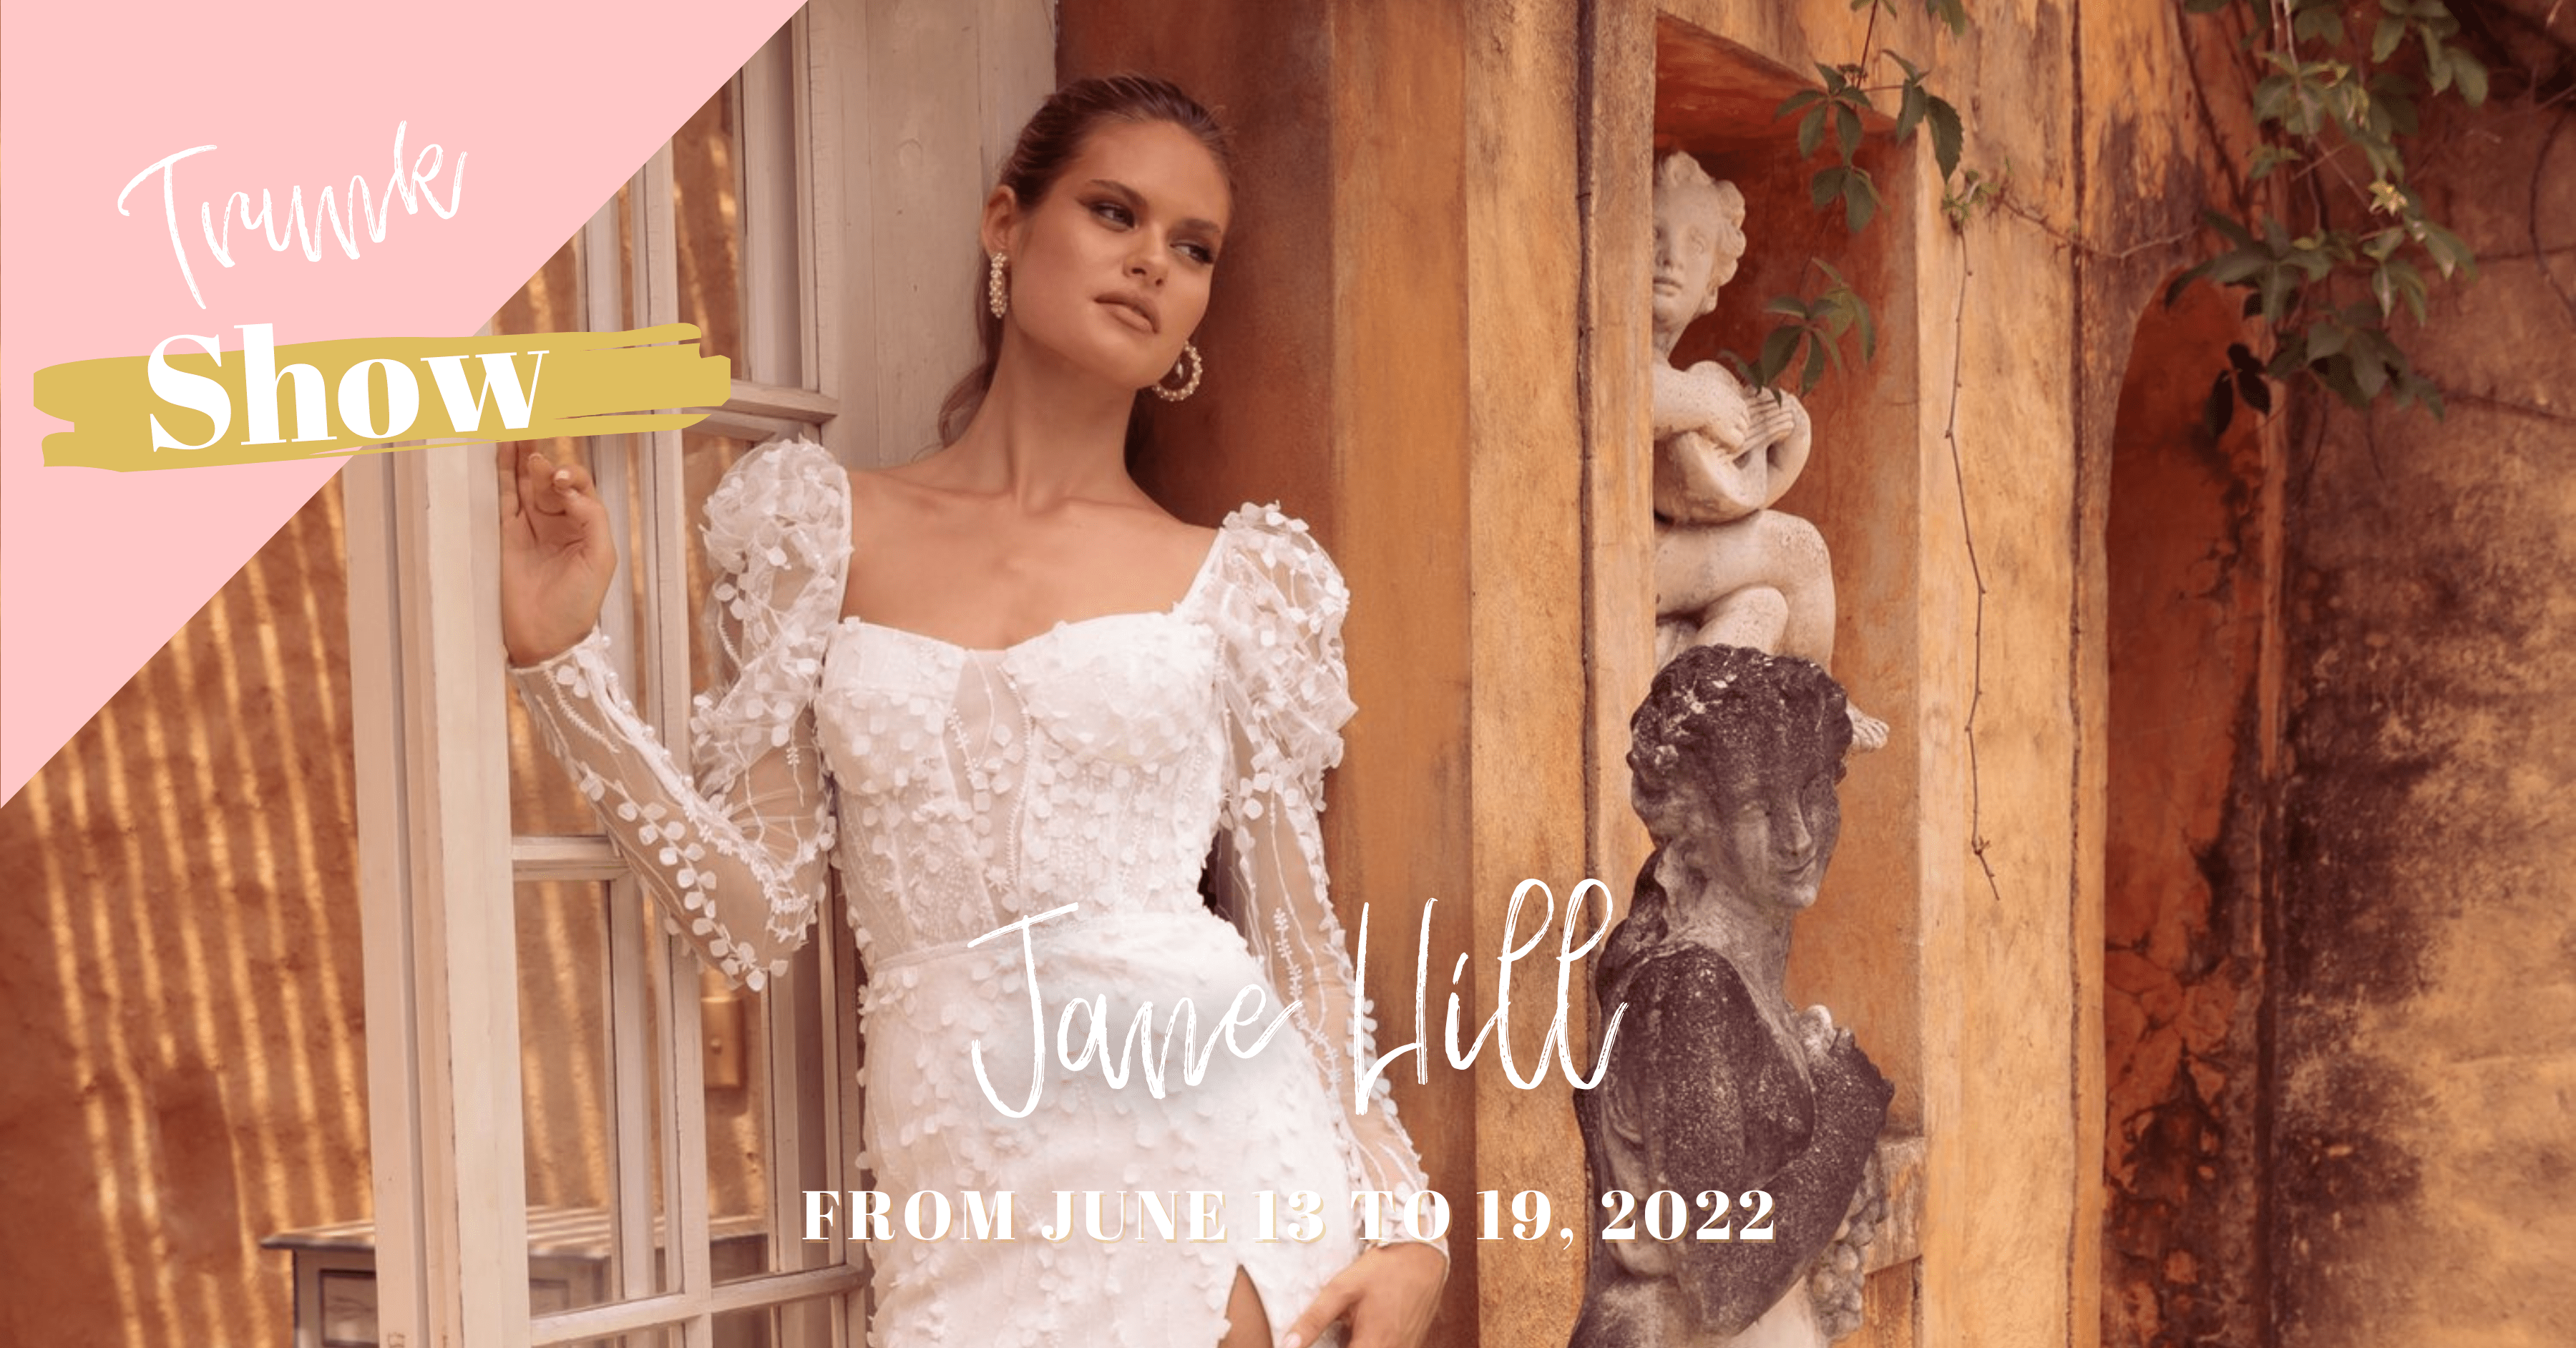 Jane Hill, from June 13 to 19 2022